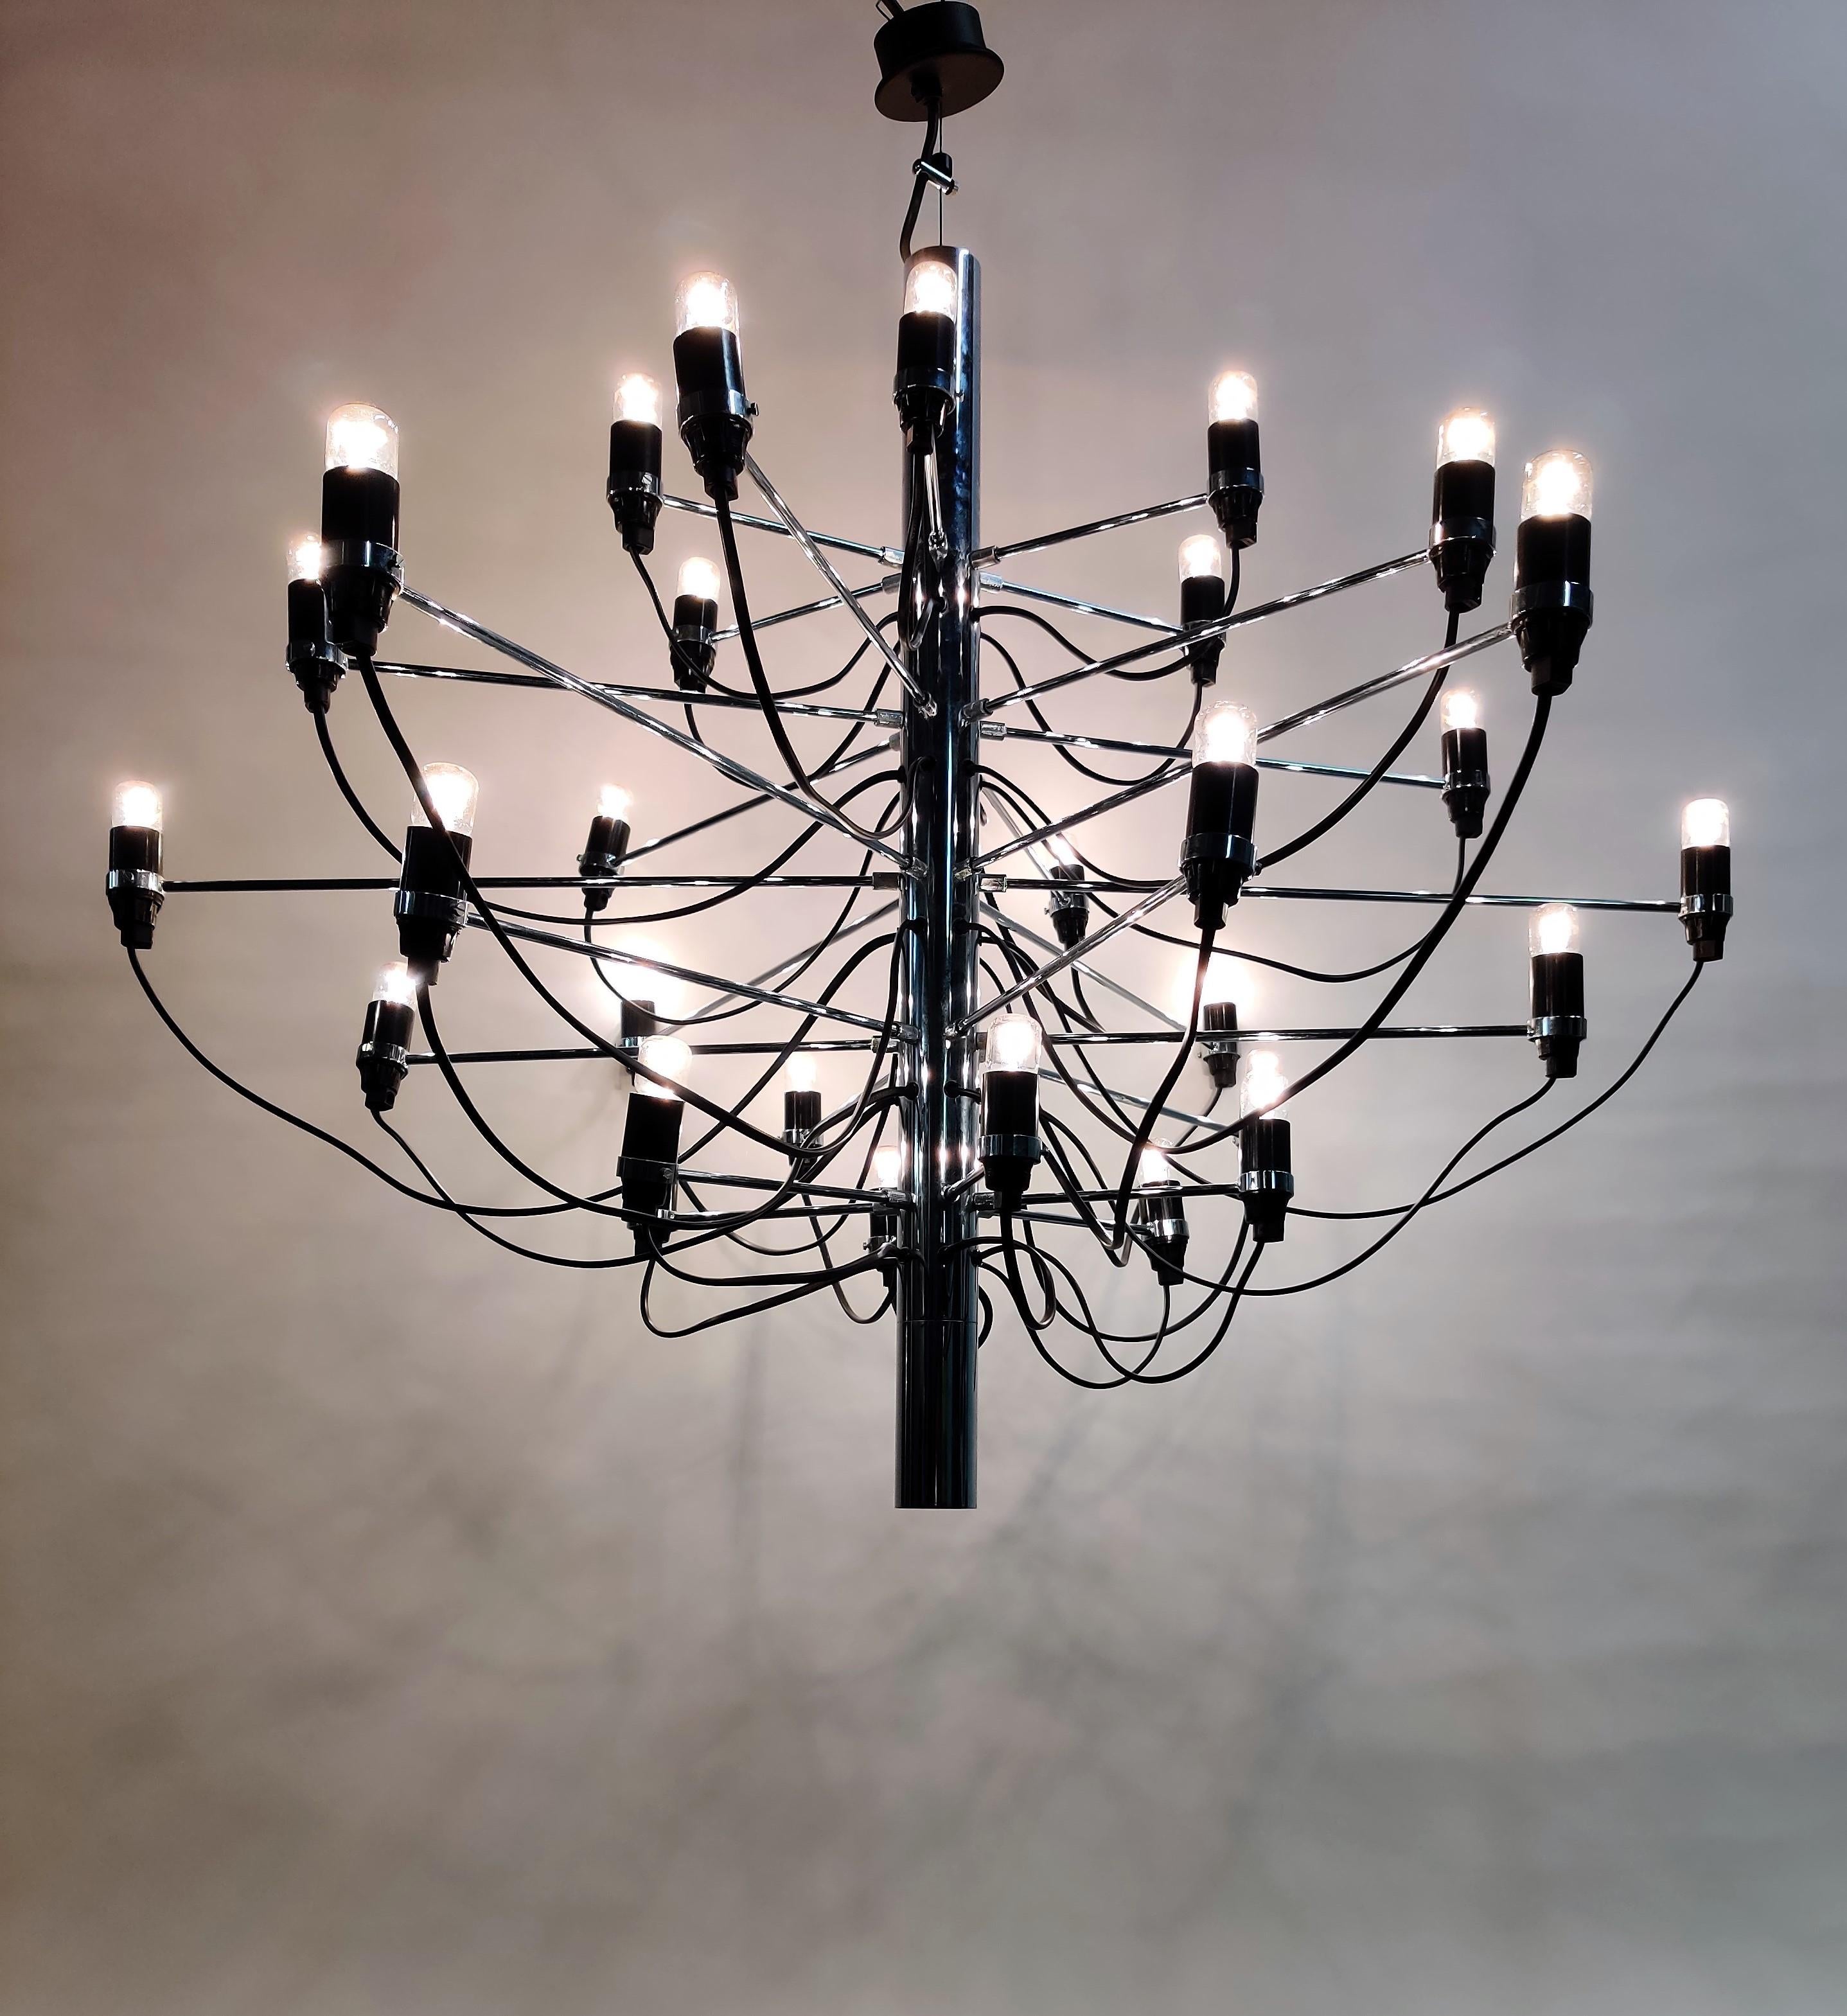 Spectacular 30 light point chrome chandelier designed By Gino Sarfatti in 1958 for Flos.

This is a more recent example, excate date is not known, probably from the 1980-1990s.

Very good condition, all original sockets.

1980s,